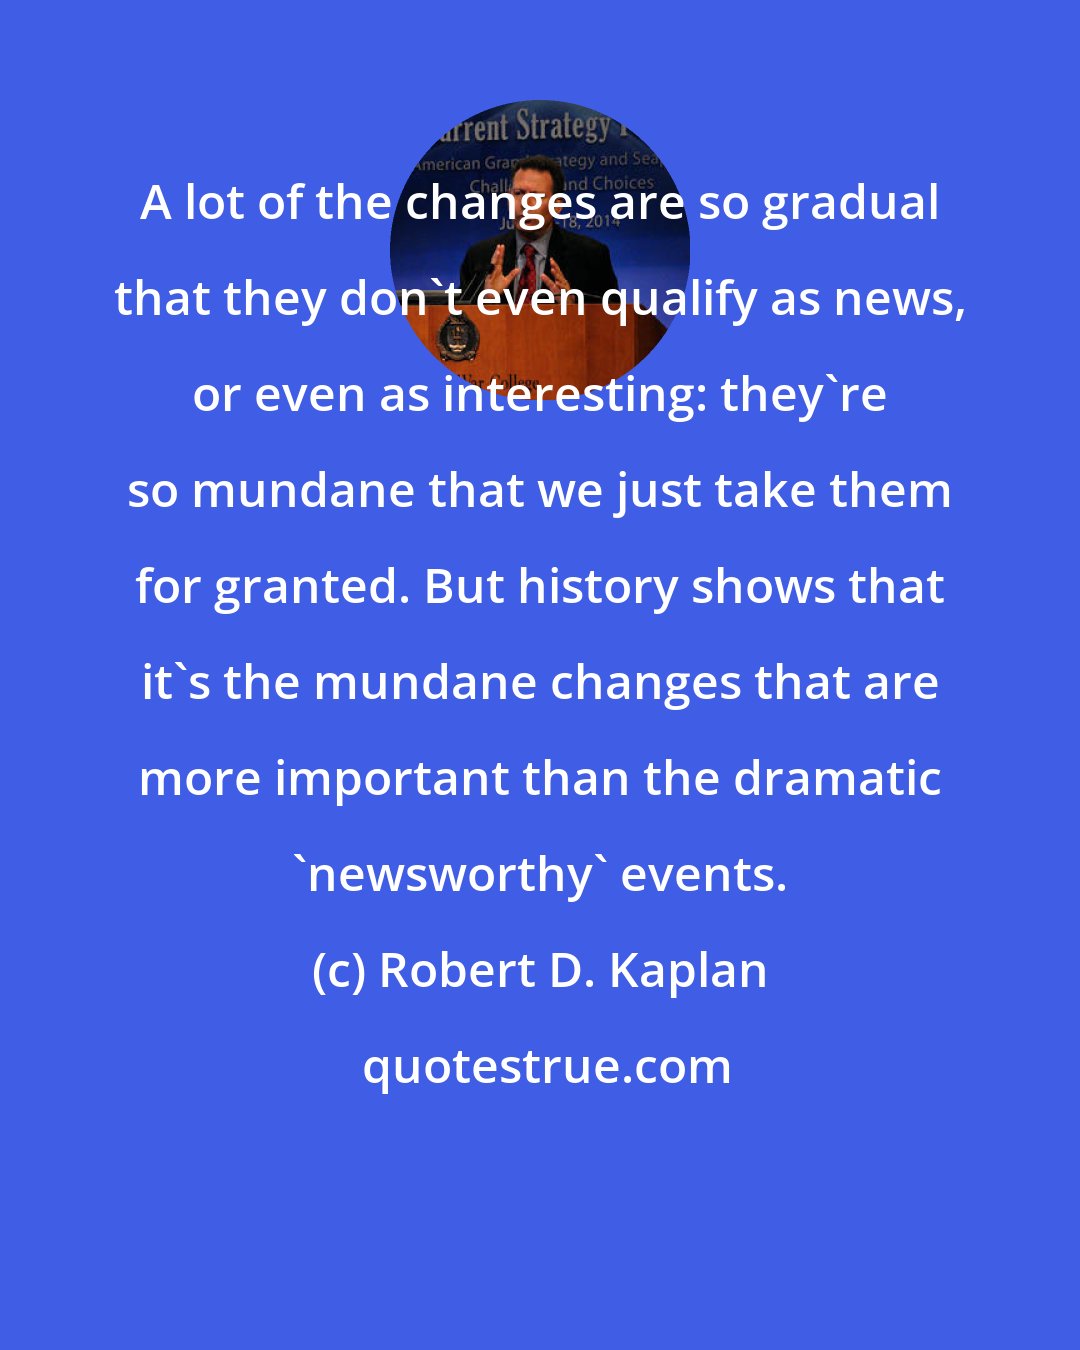 Robert D. Kaplan: A lot of the changes are so gradual that they don't even qualify as news, or even as interesting: they're so mundane that we just take them for granted. But history shows that it's the mundane changes that are more important than the dramatic 'newsworthy' events.